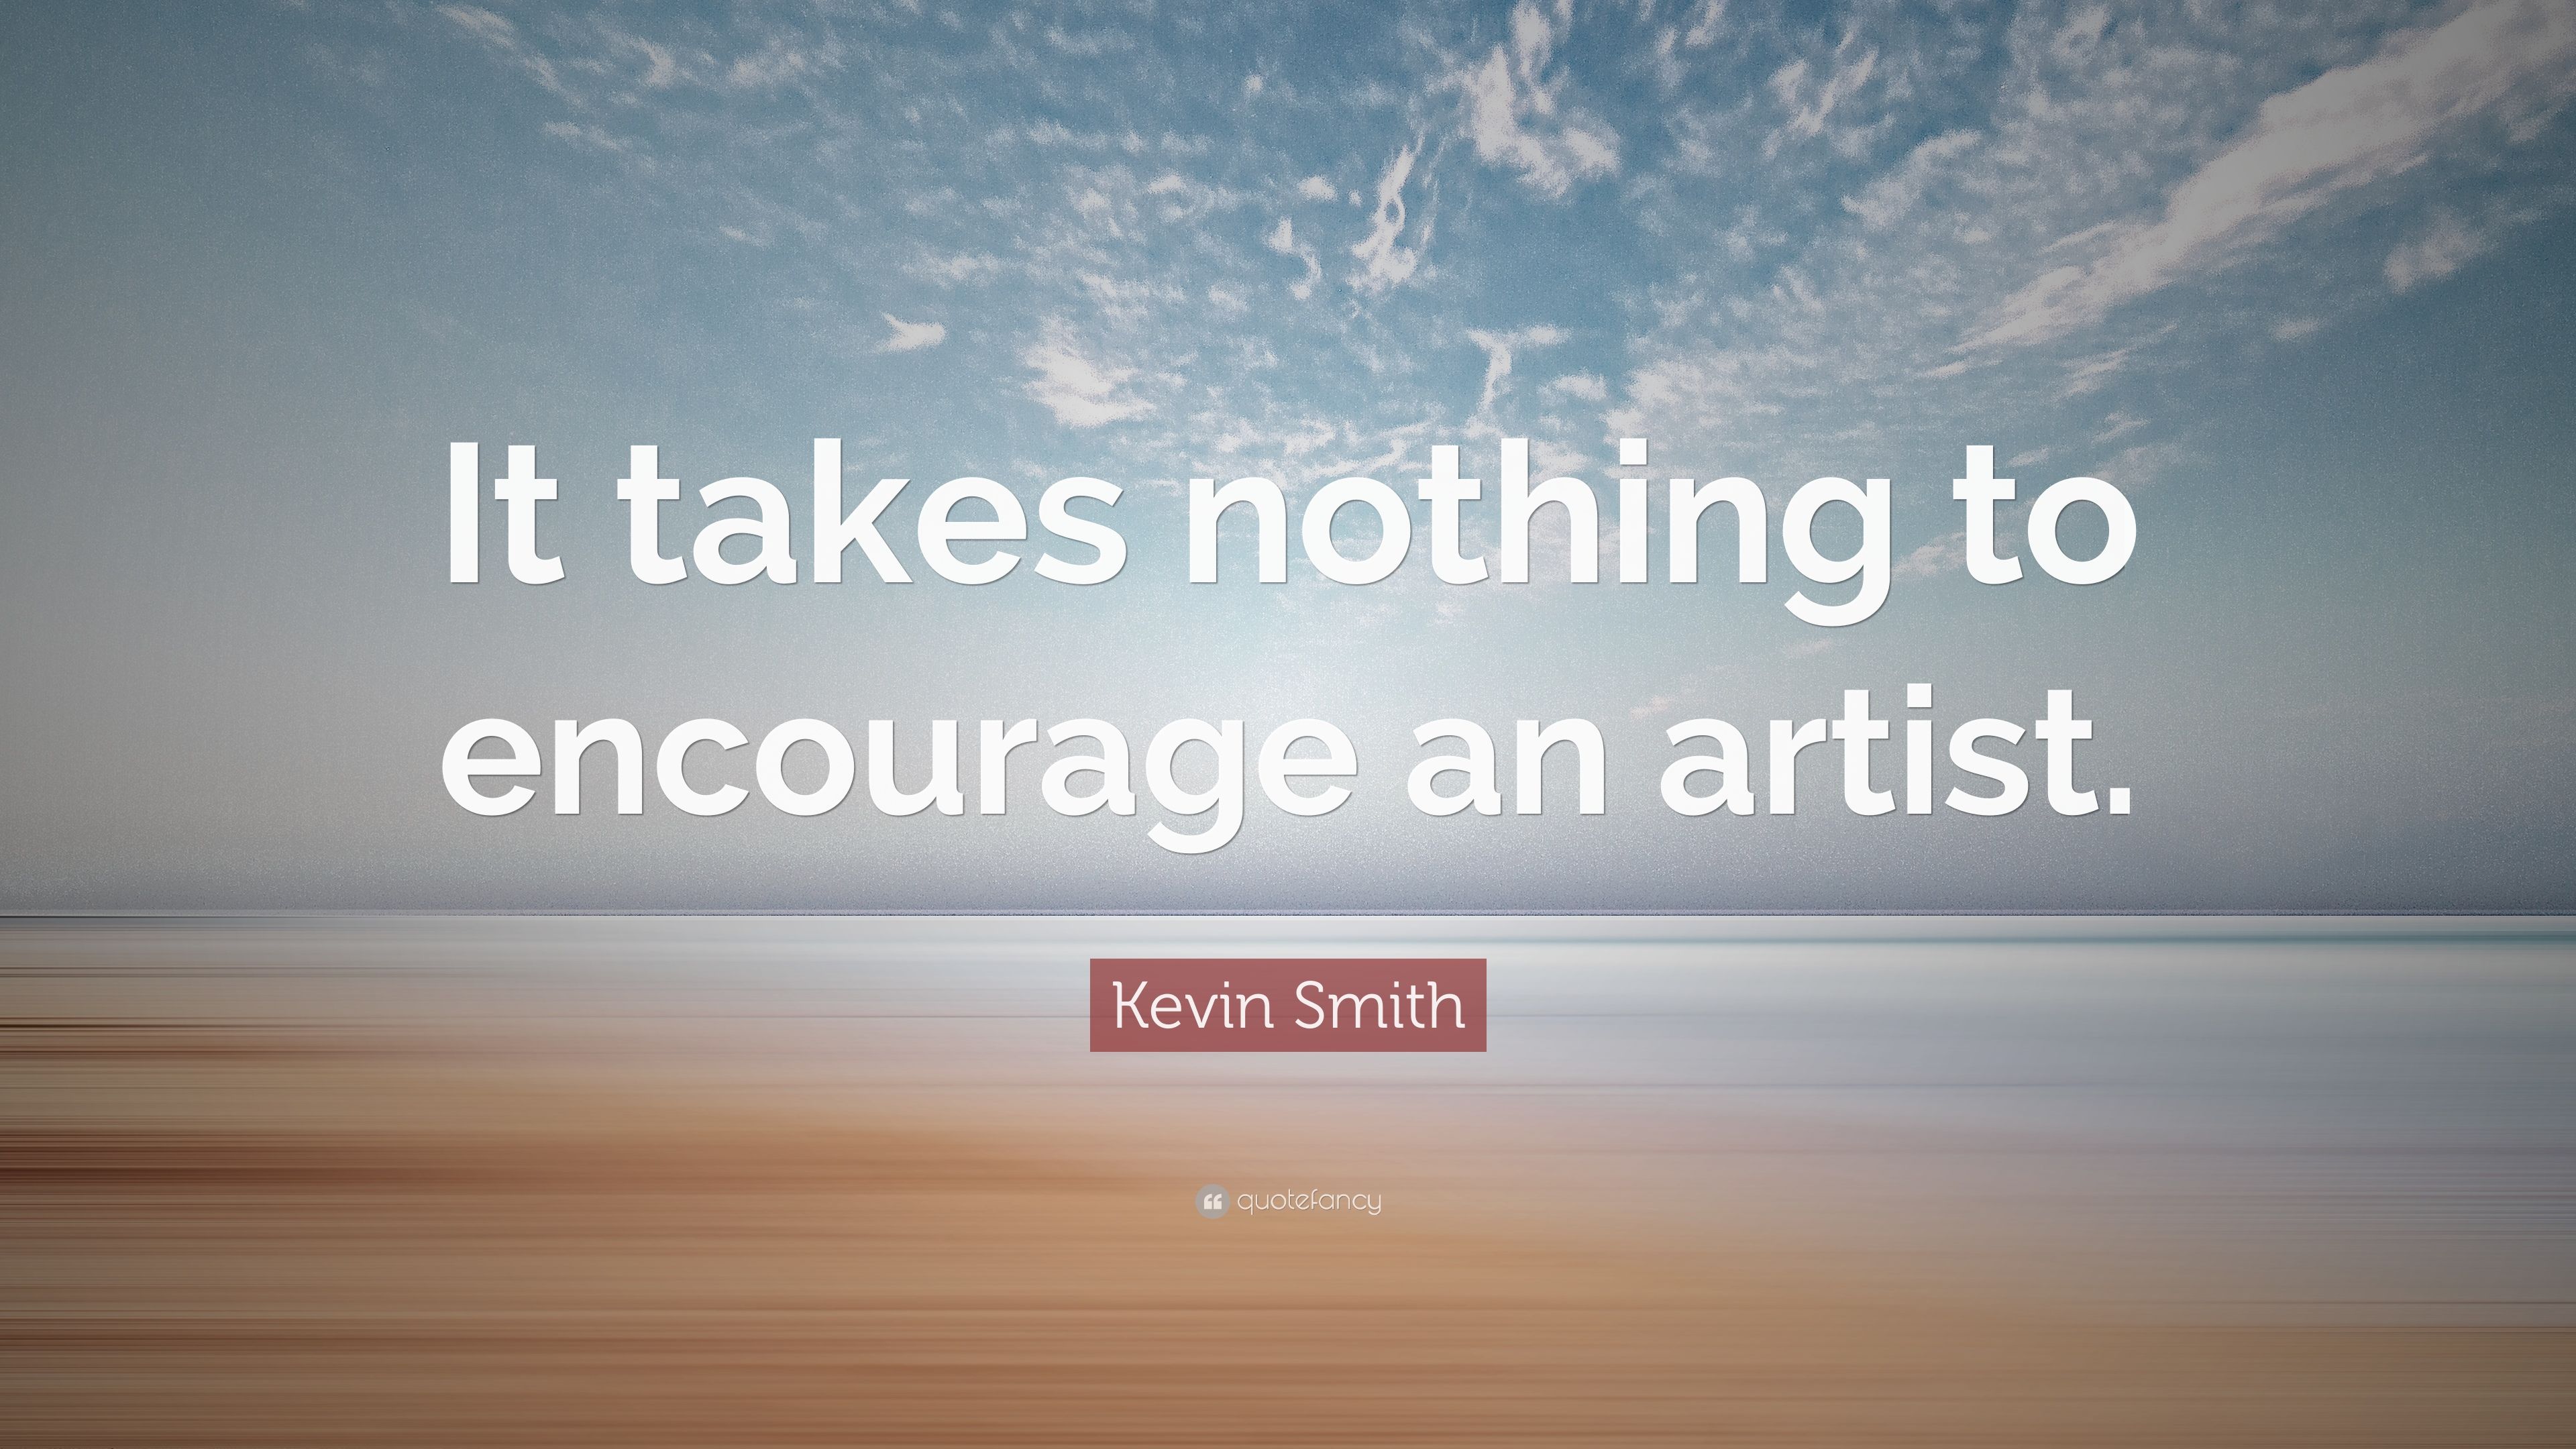 Kevin Smith Quote: “It takes nothing to encourage an artist.” 10